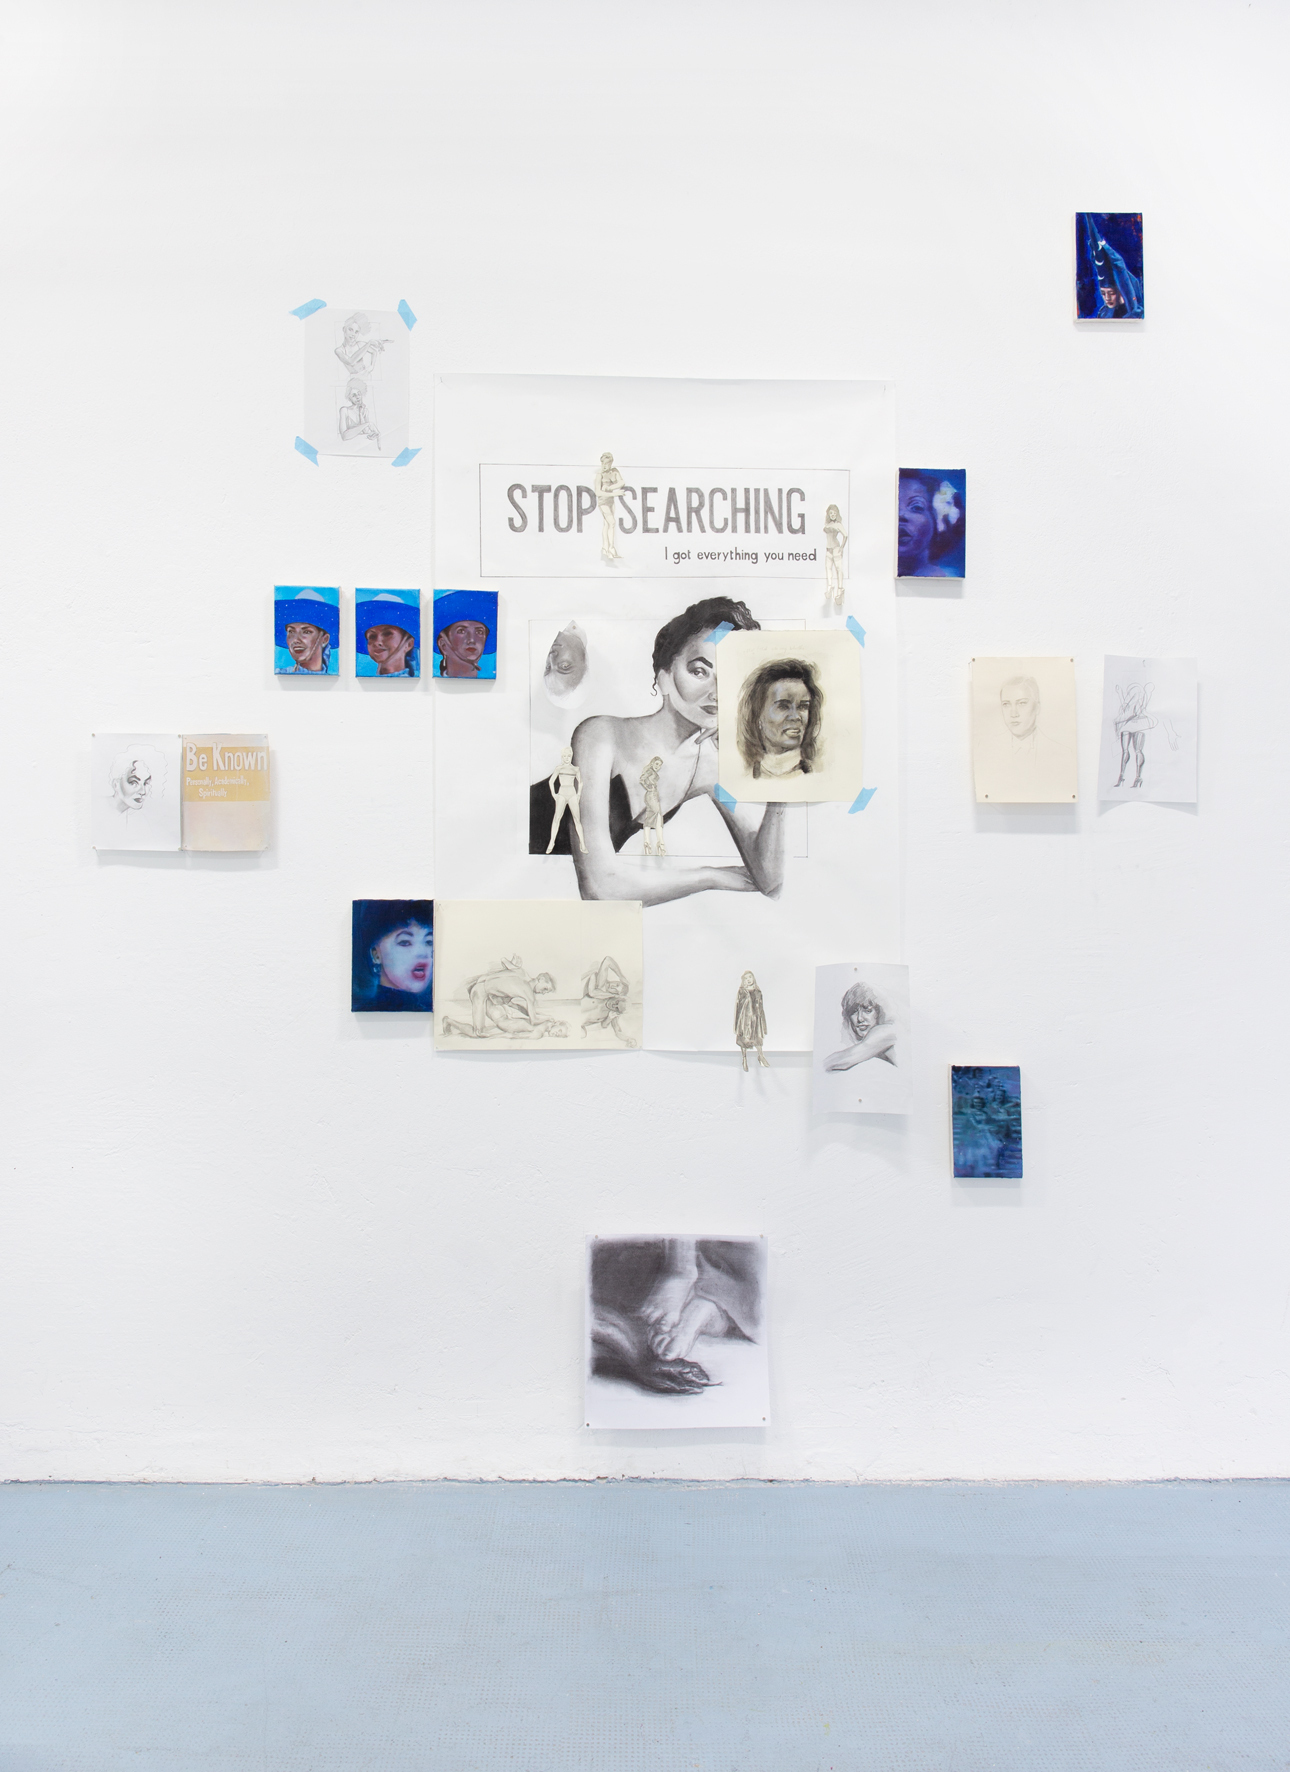 Annabelle Agbo Godeau, installation view of "Stop searching (I got verything you need)" 2021, coal on paper and oil on canvas